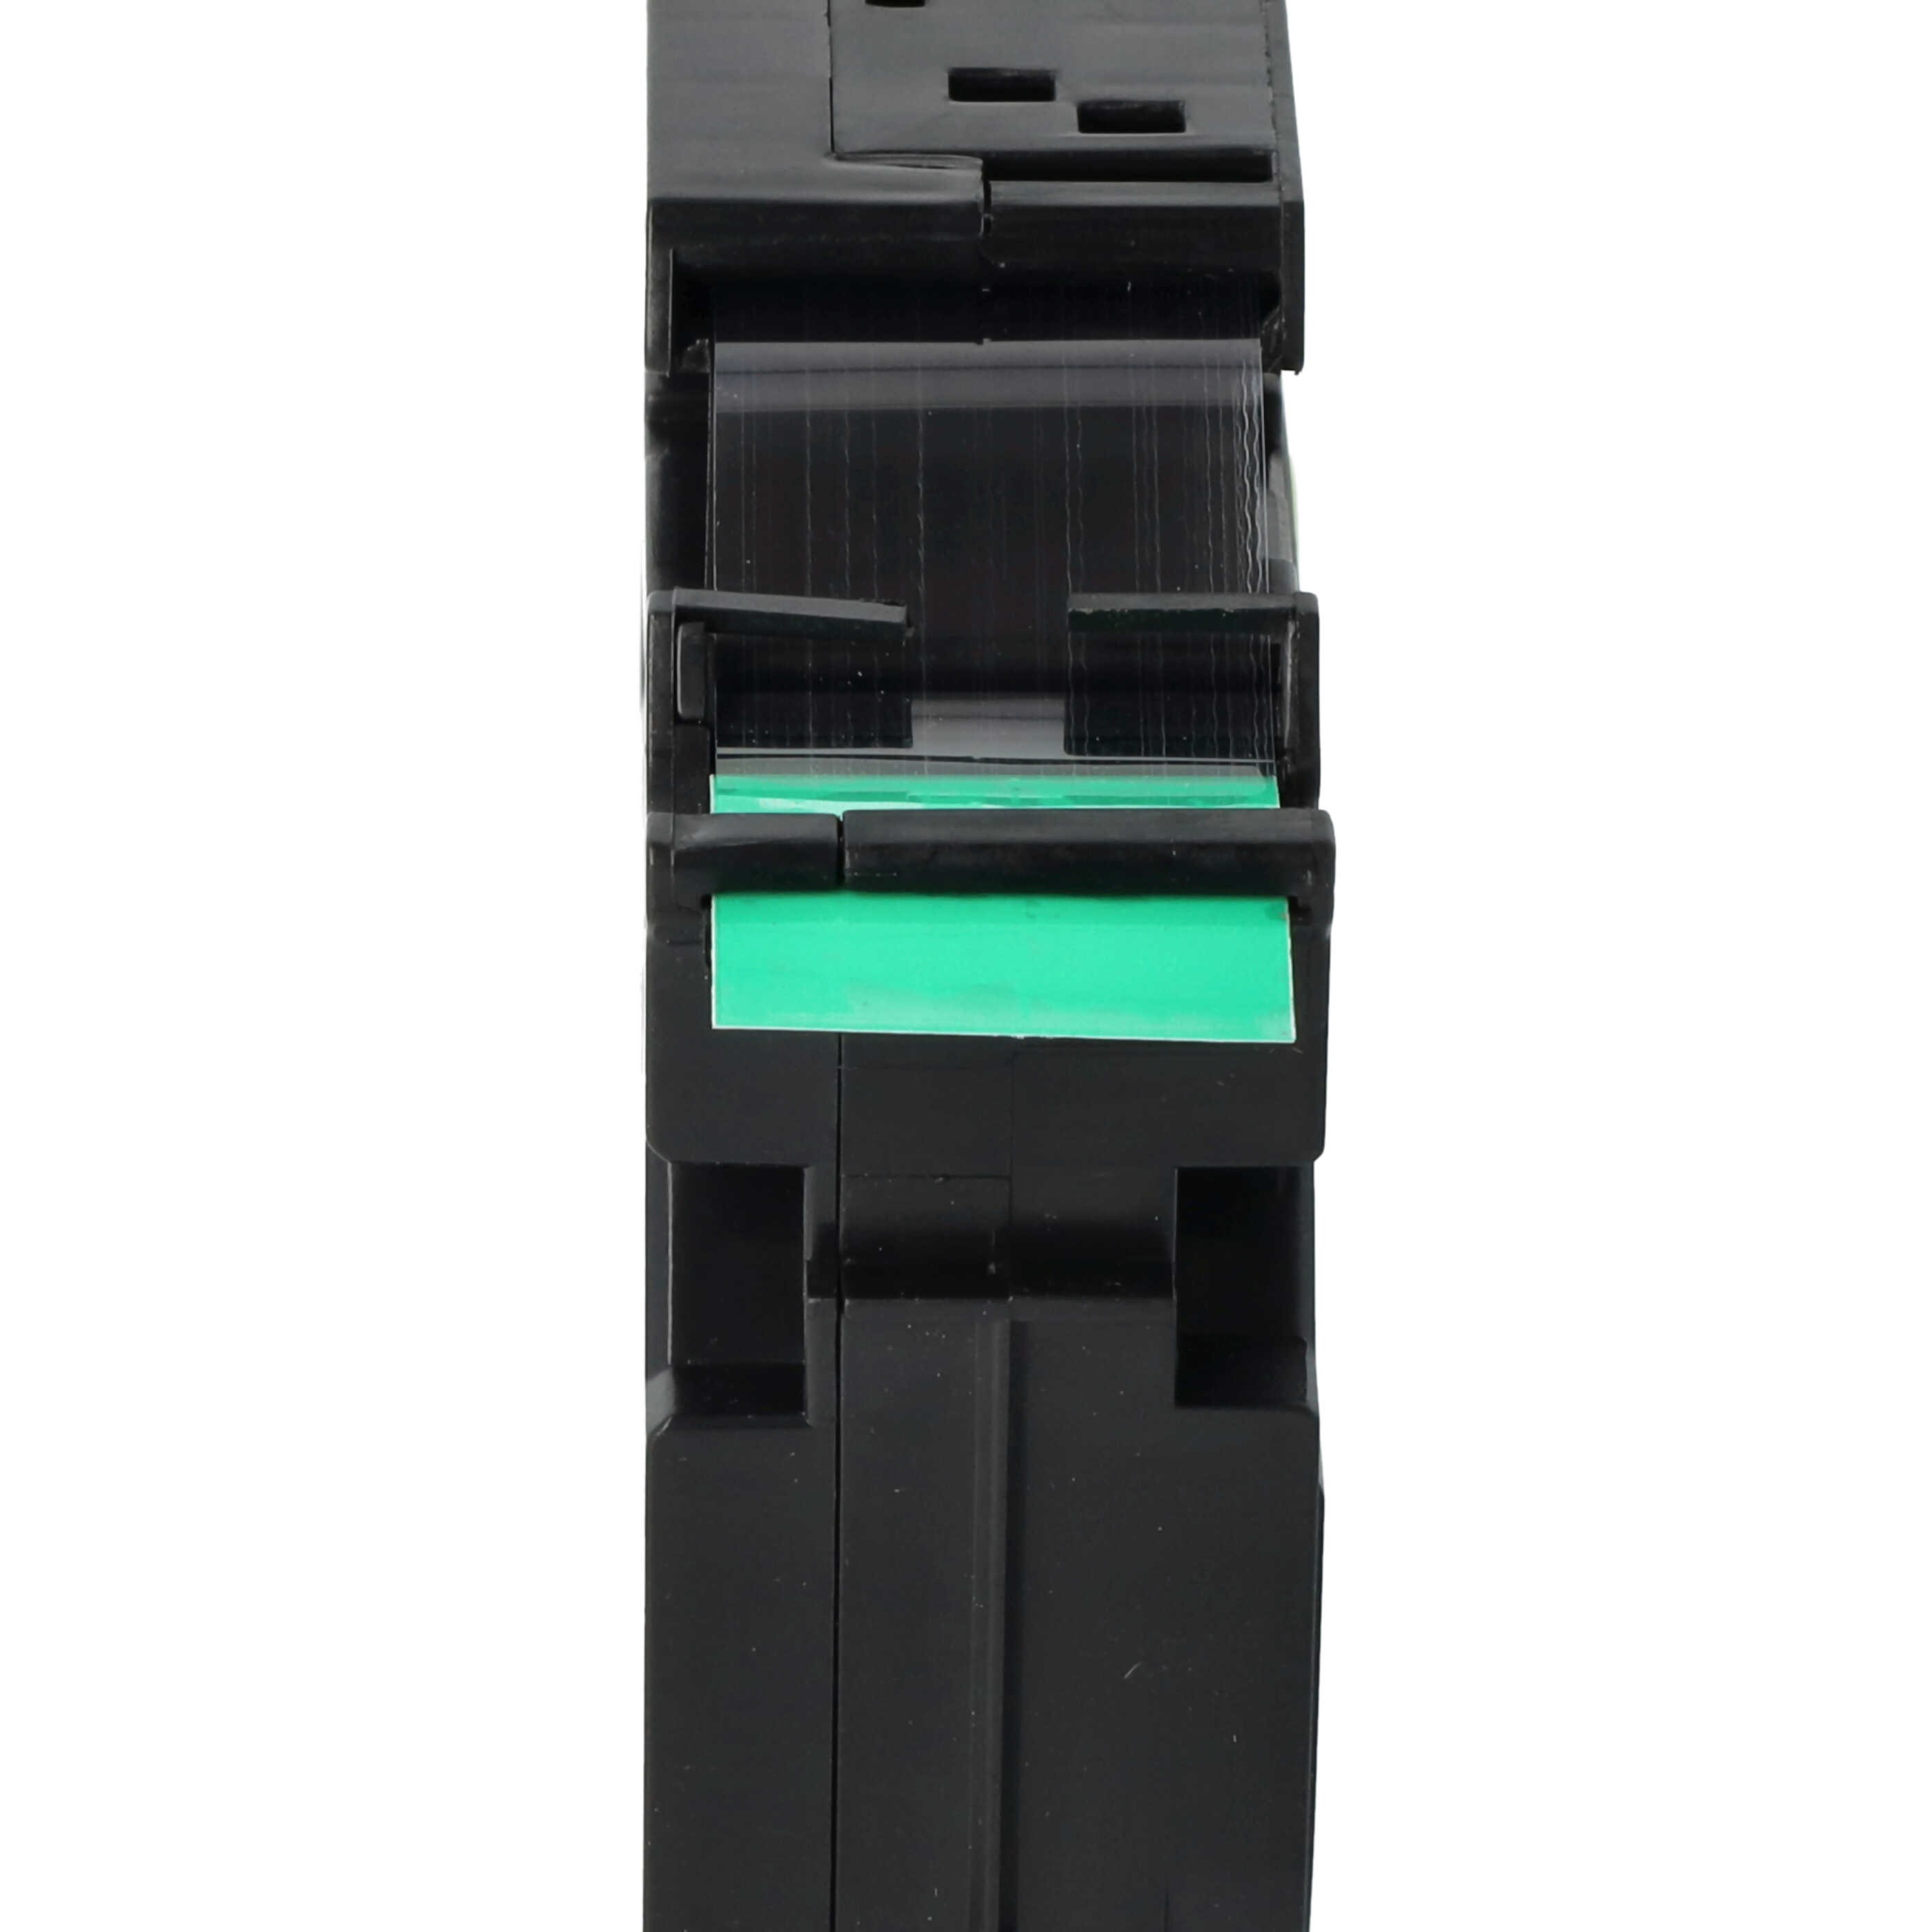 Label Tape as Replacement for Brother TZE-S741 - 18 mm Black to Green, Extra Stark